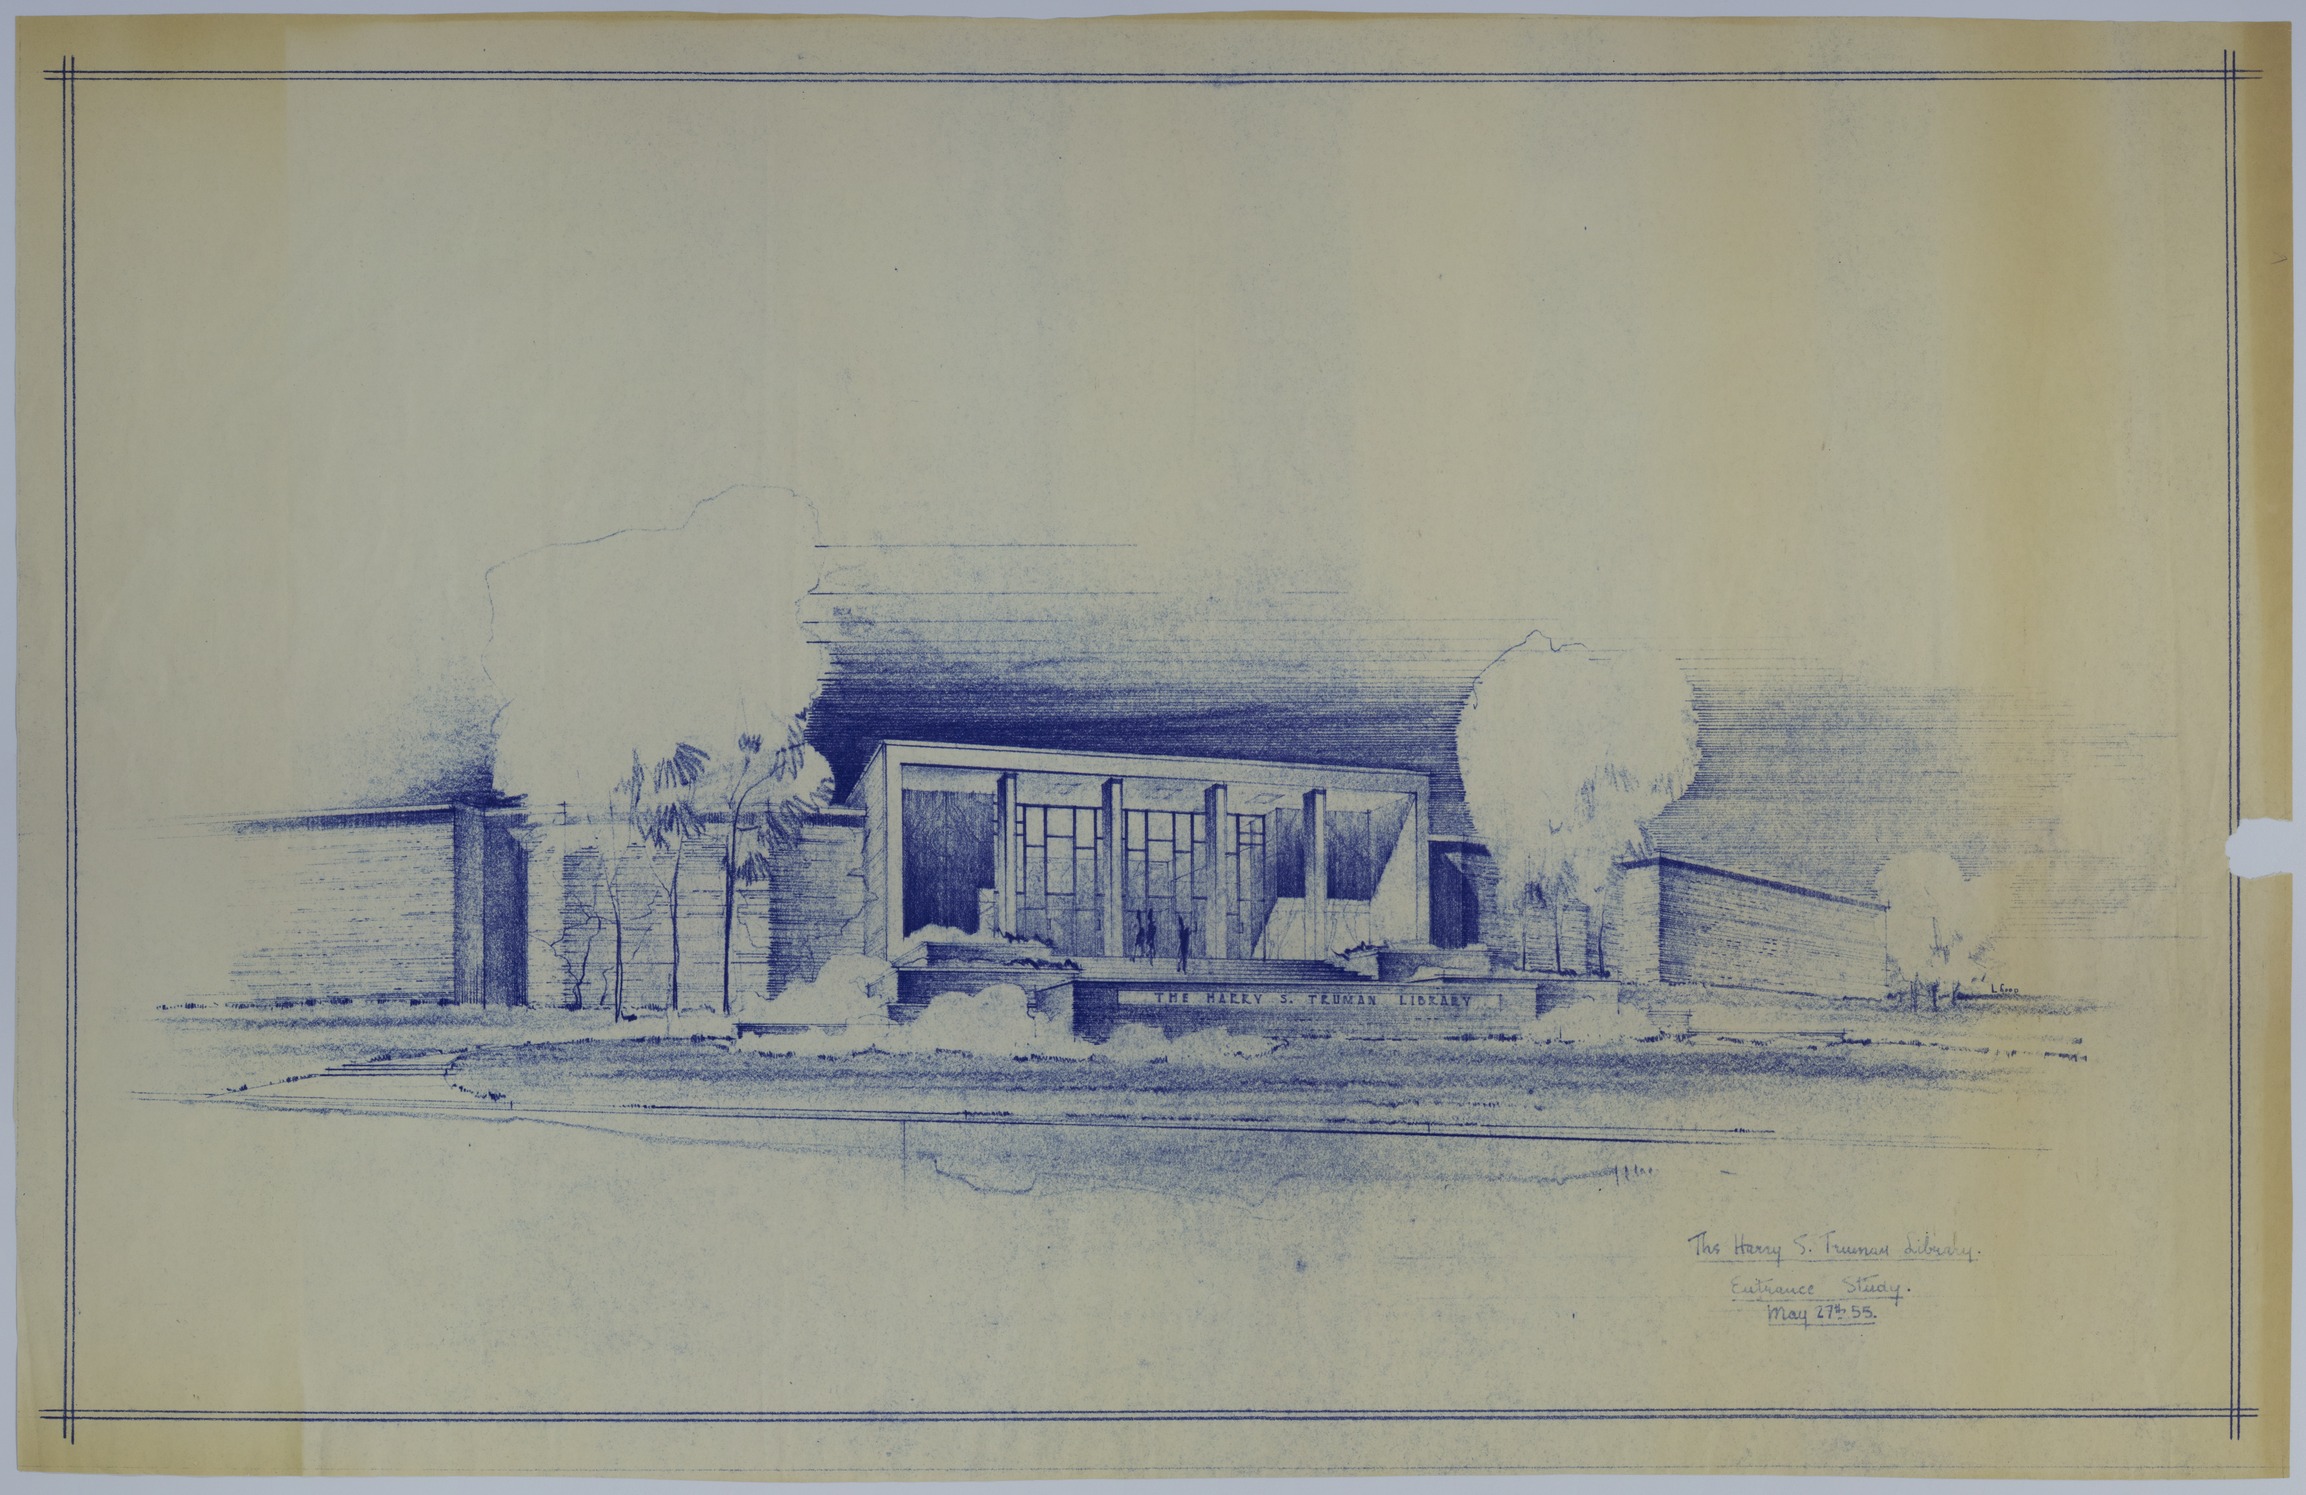 Drawing of the Proposed Entrance Study of the Harry S. Truman Library